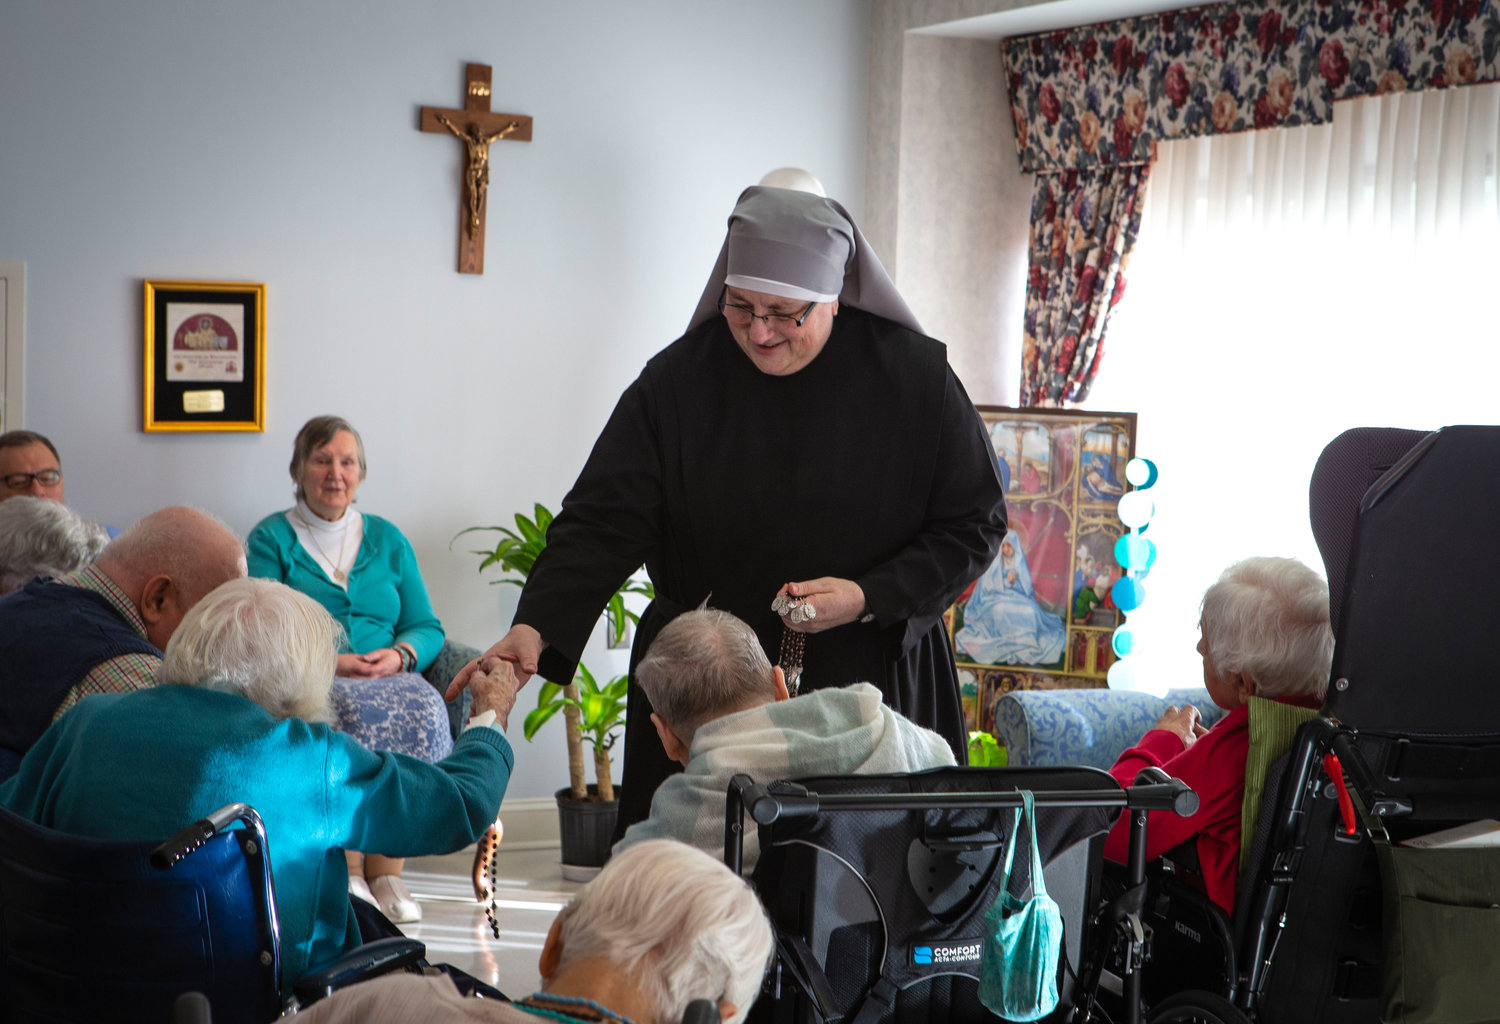 Sister Constance Veit, a Little Sister of the Poor, collects rosaries from elderly residents following prayers at the Jeanne Jugan Residence for senior care in Washington March 25, 2019. Sister Constance is considered a spiritual mother by many of the residents, who said they will honor her on Mother’s Day.